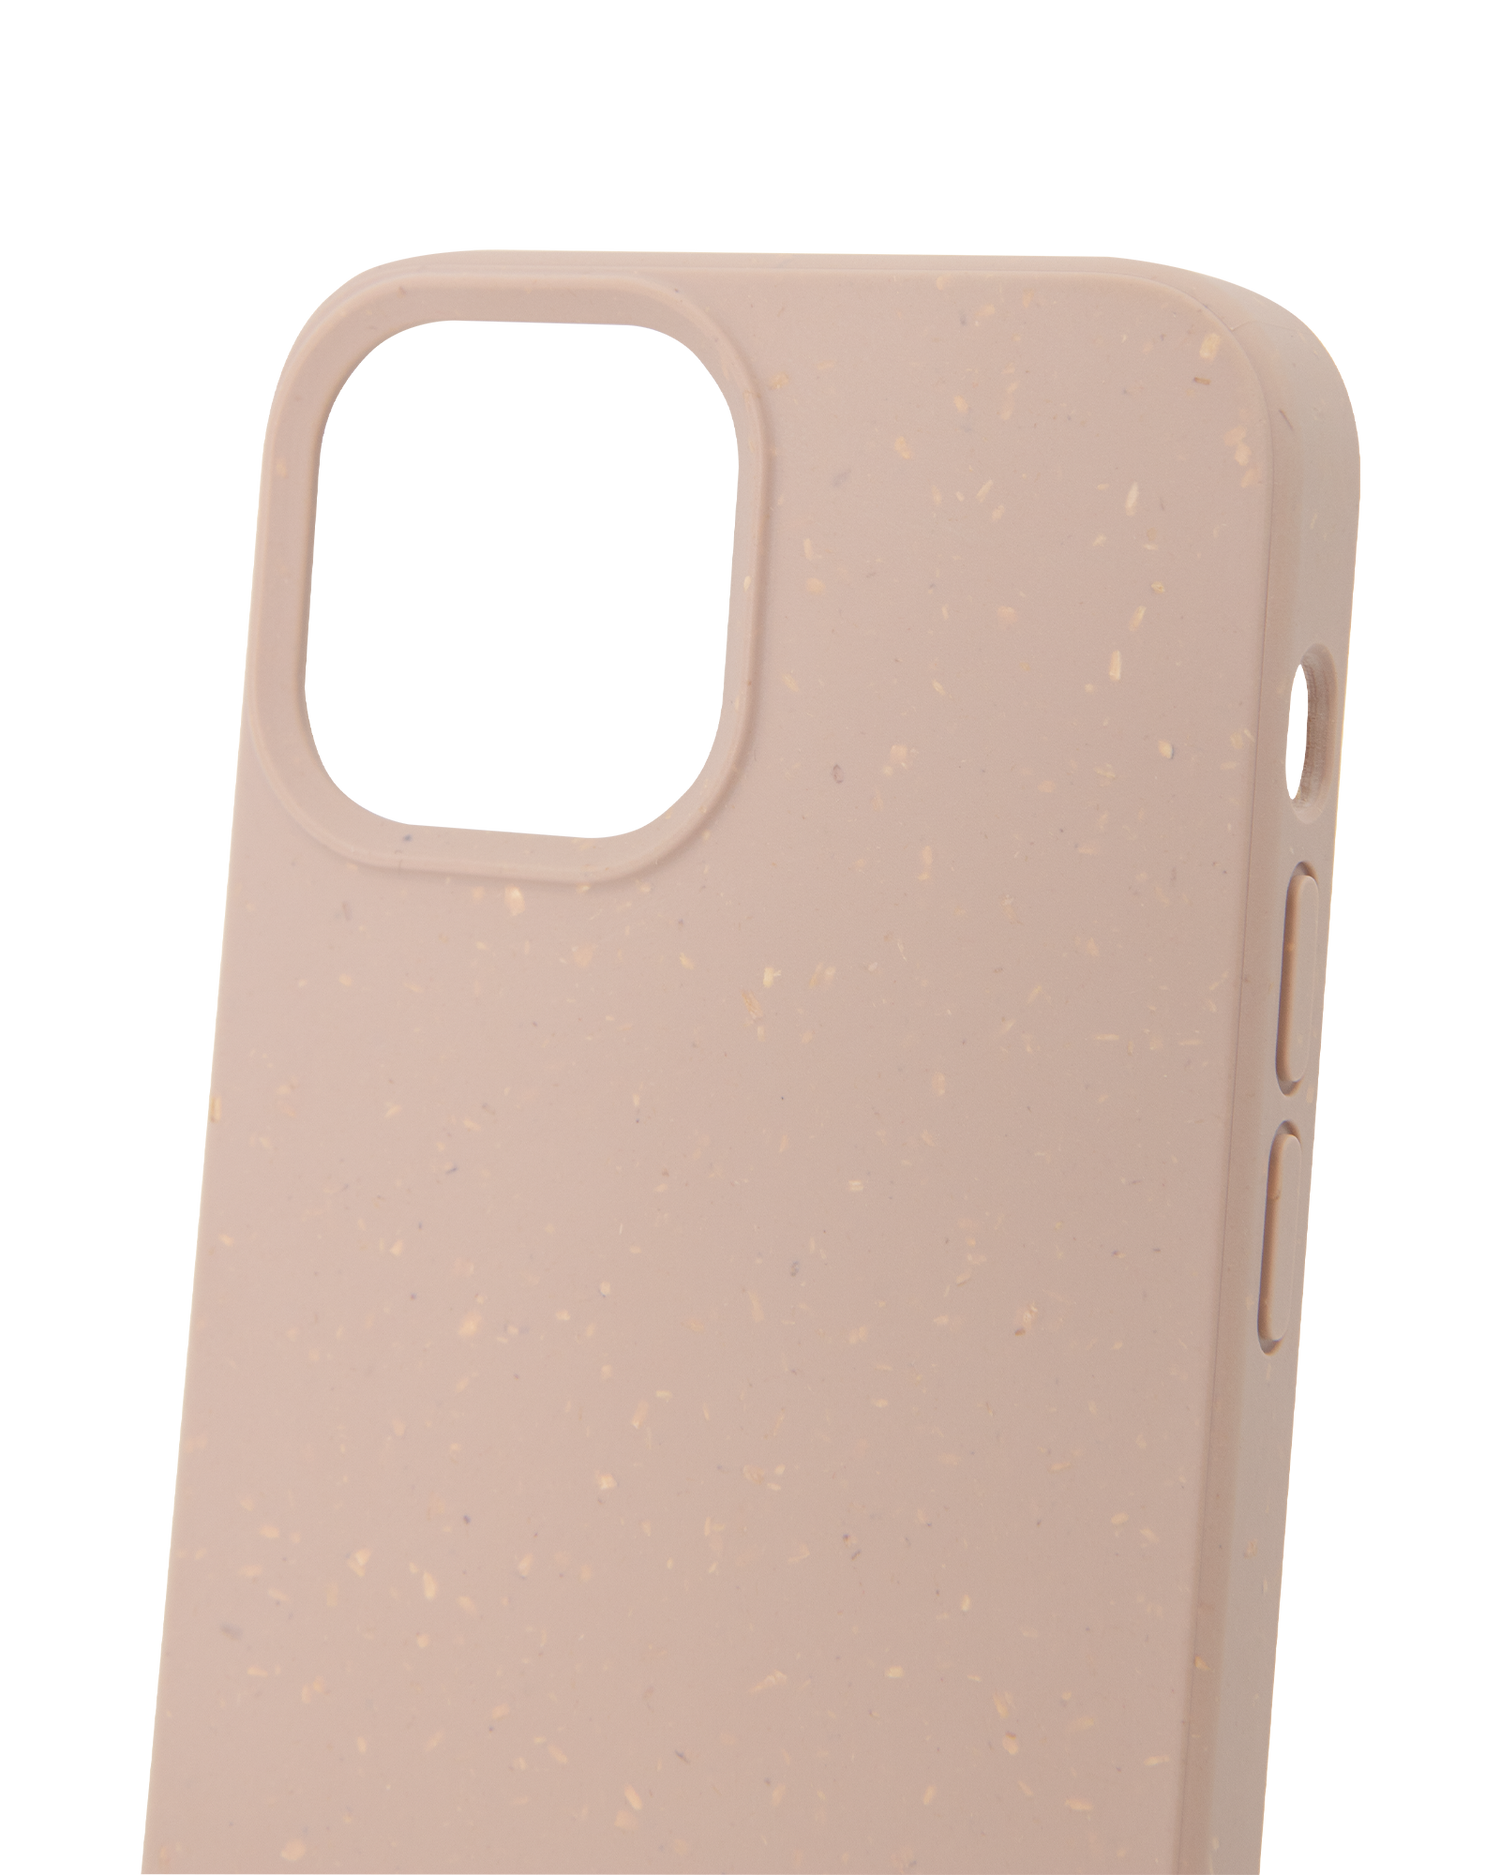 Sand Pink Eco-Friendly Phone Case for Apple iPhone 12 mini: Details outside